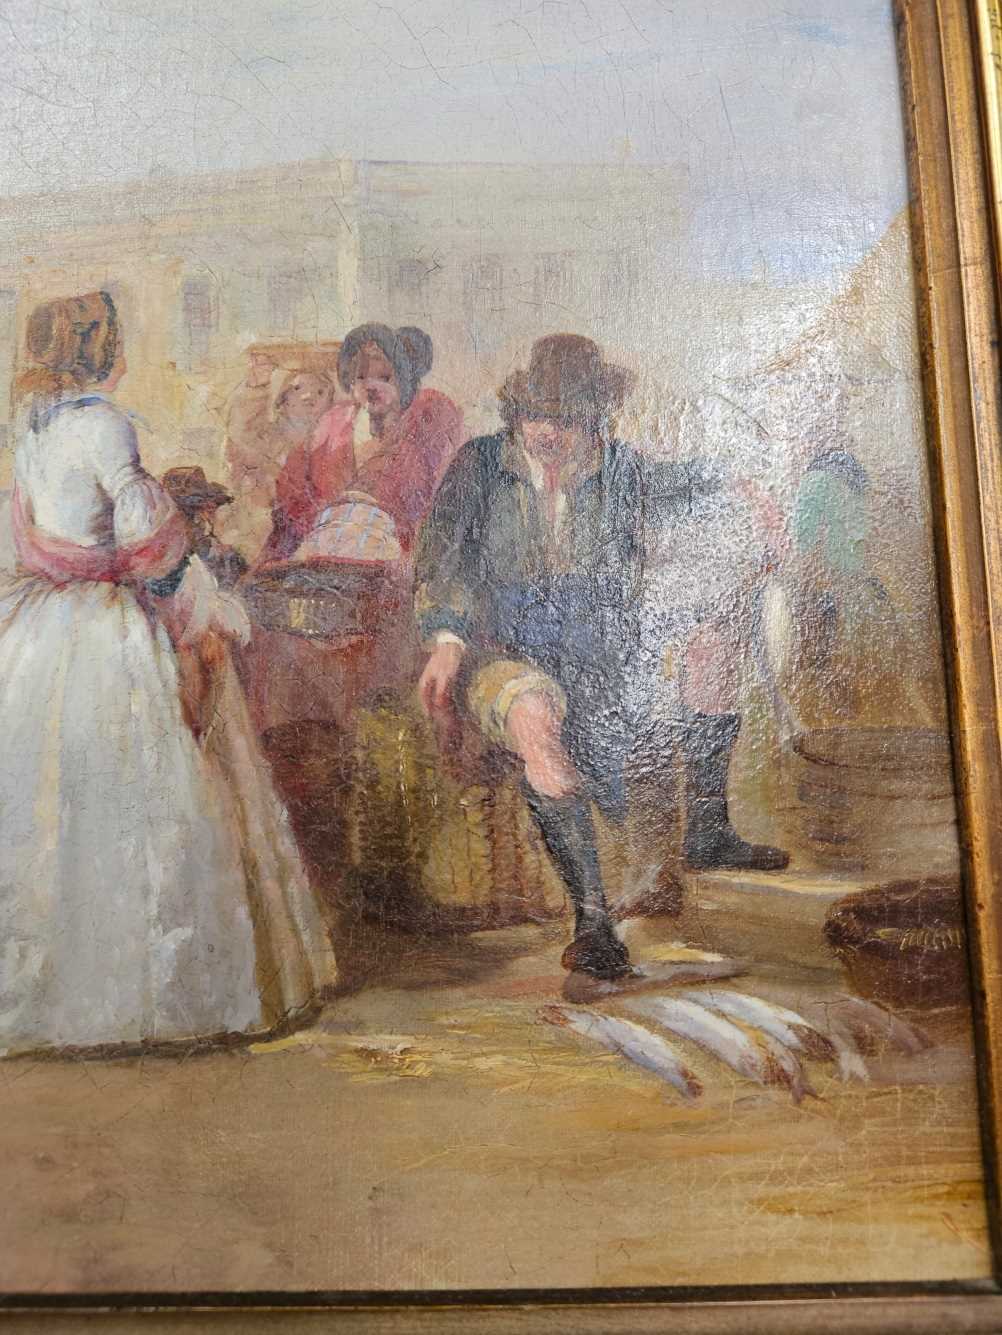 ENGLISH SCHOOL (19TH CENTURY), RAMSGATE MARKET, OIL ON CANVAS, 44 x 34cm. This has been cleaned - Image 6 of 9